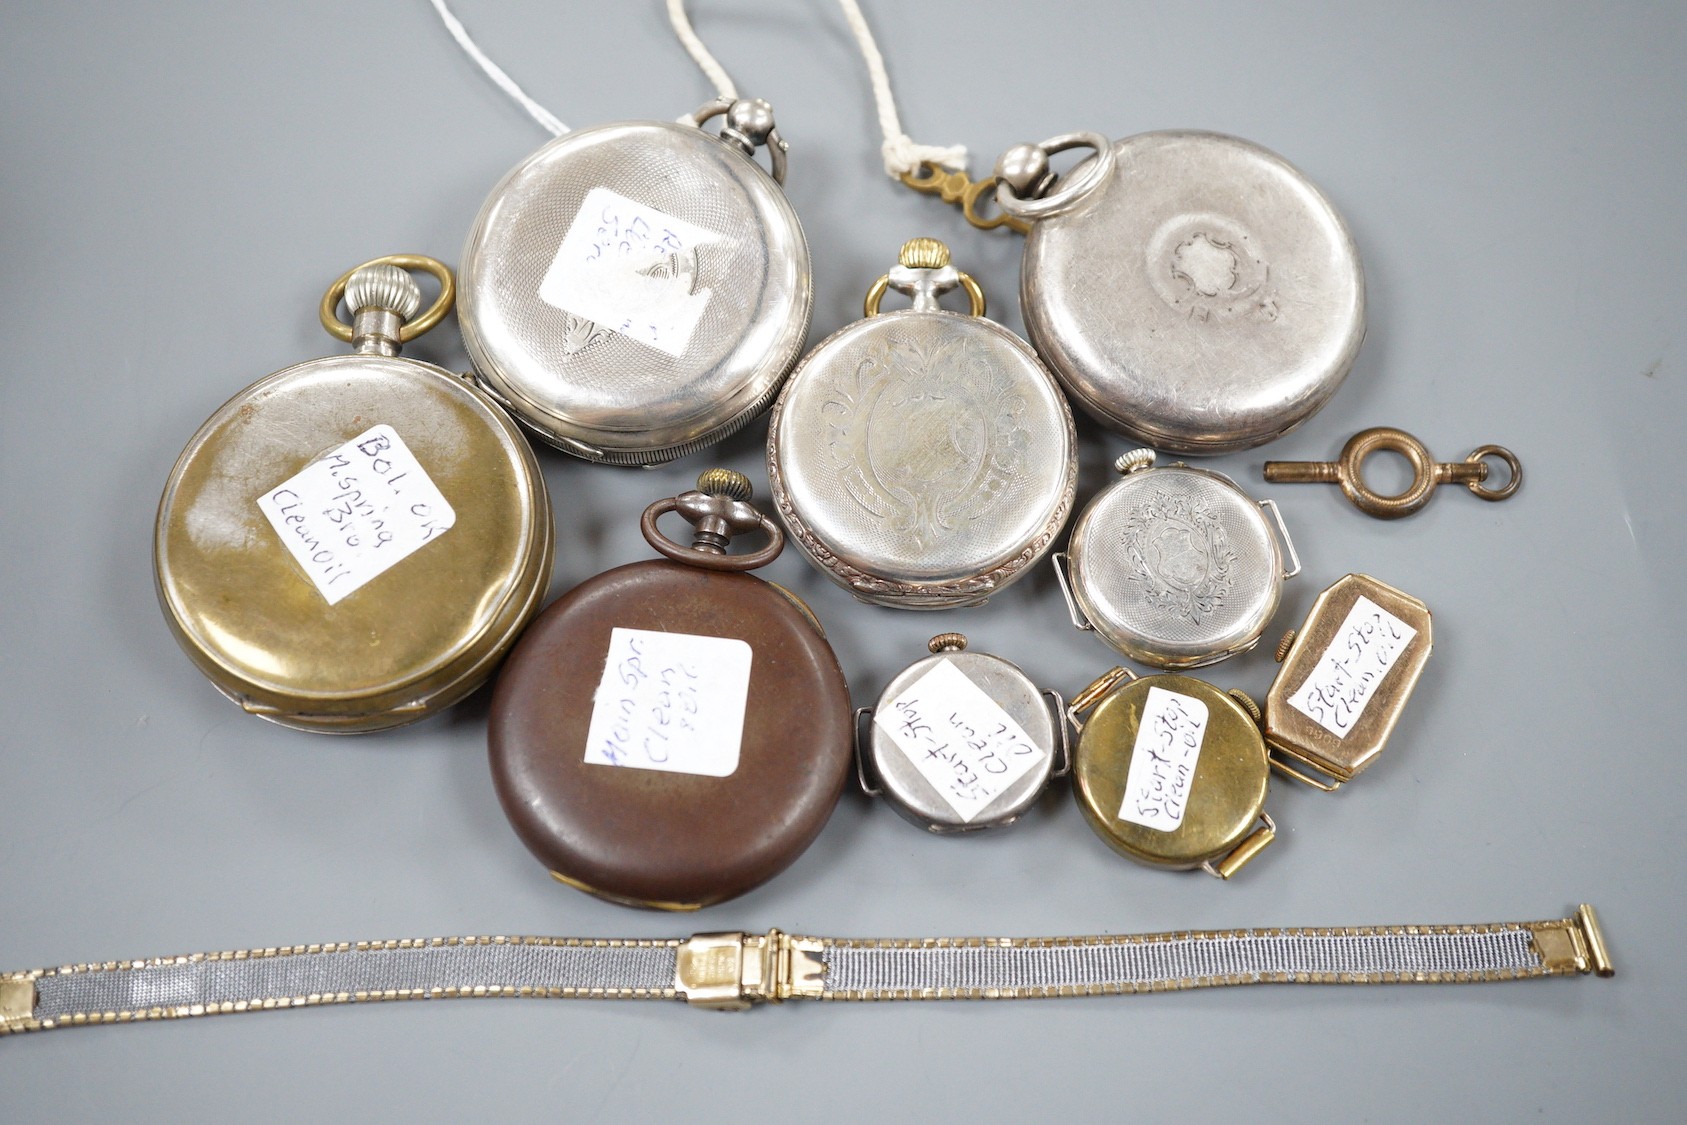 Two silver open faced pocket watches including Catesbys Ltd Record Lever, a German 800 pocket watch, two other base metal pocket watches, four assorted wrist watches and a gilt metal watch bracelet.